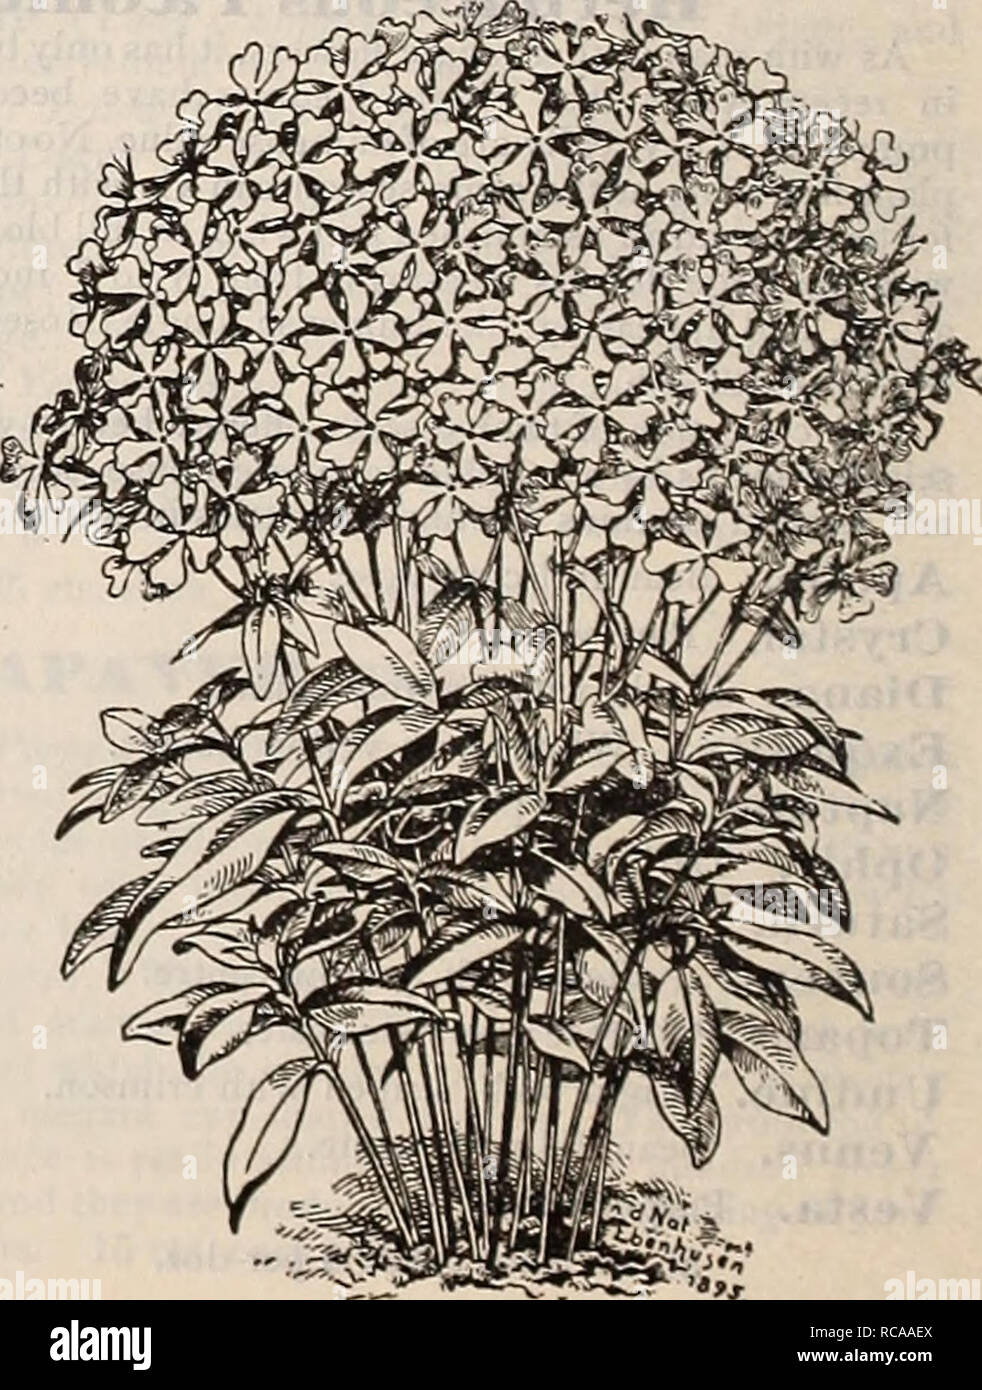 . Dreer's 1901 garden calendar. Seeds Catalogs; Nursery stock Catalogs; Gardening Equipment and supplies Catalogs; Flowers Seeds Catalogs; Vegetables Seeds Catalogs; Fruit Seeds Catalogs. Phlox Subulata Divaricata Canadensis. One of our native varieties that is but rarely met with, and a plant that is certain to meet with much favor when better known, as nothing can produce such a cheerful corner in the garden in the very early sprin&lt;j; frequently beginning to bloom early in April, it con- tinues until about the middle of June, with large bright lilac-colored flowers, which are produced on  Stock Photo